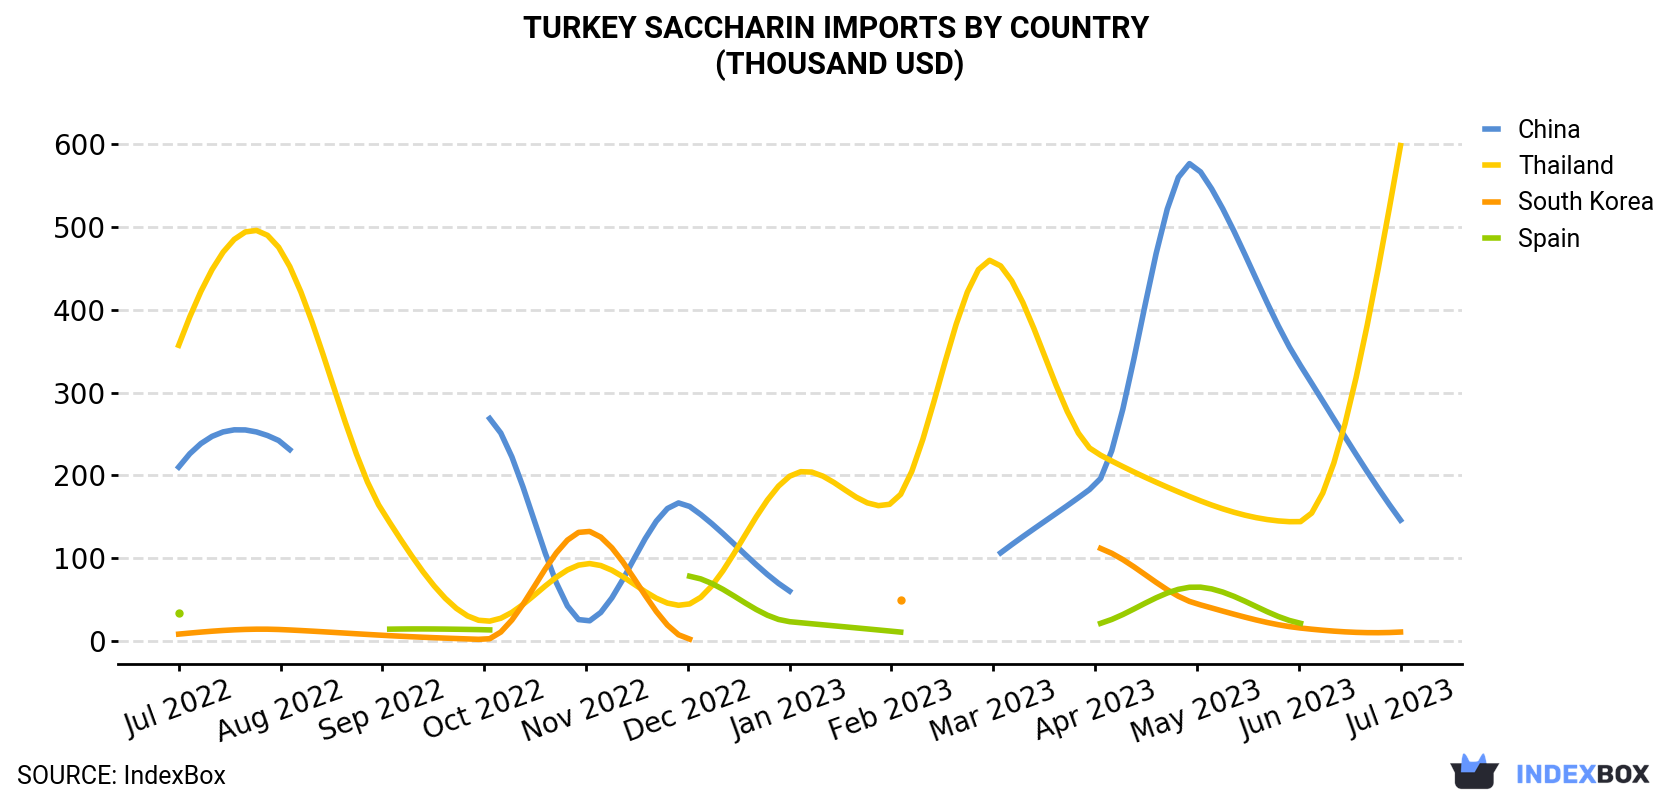 Turkey Saccharin Imports By Country (Thousand USD)